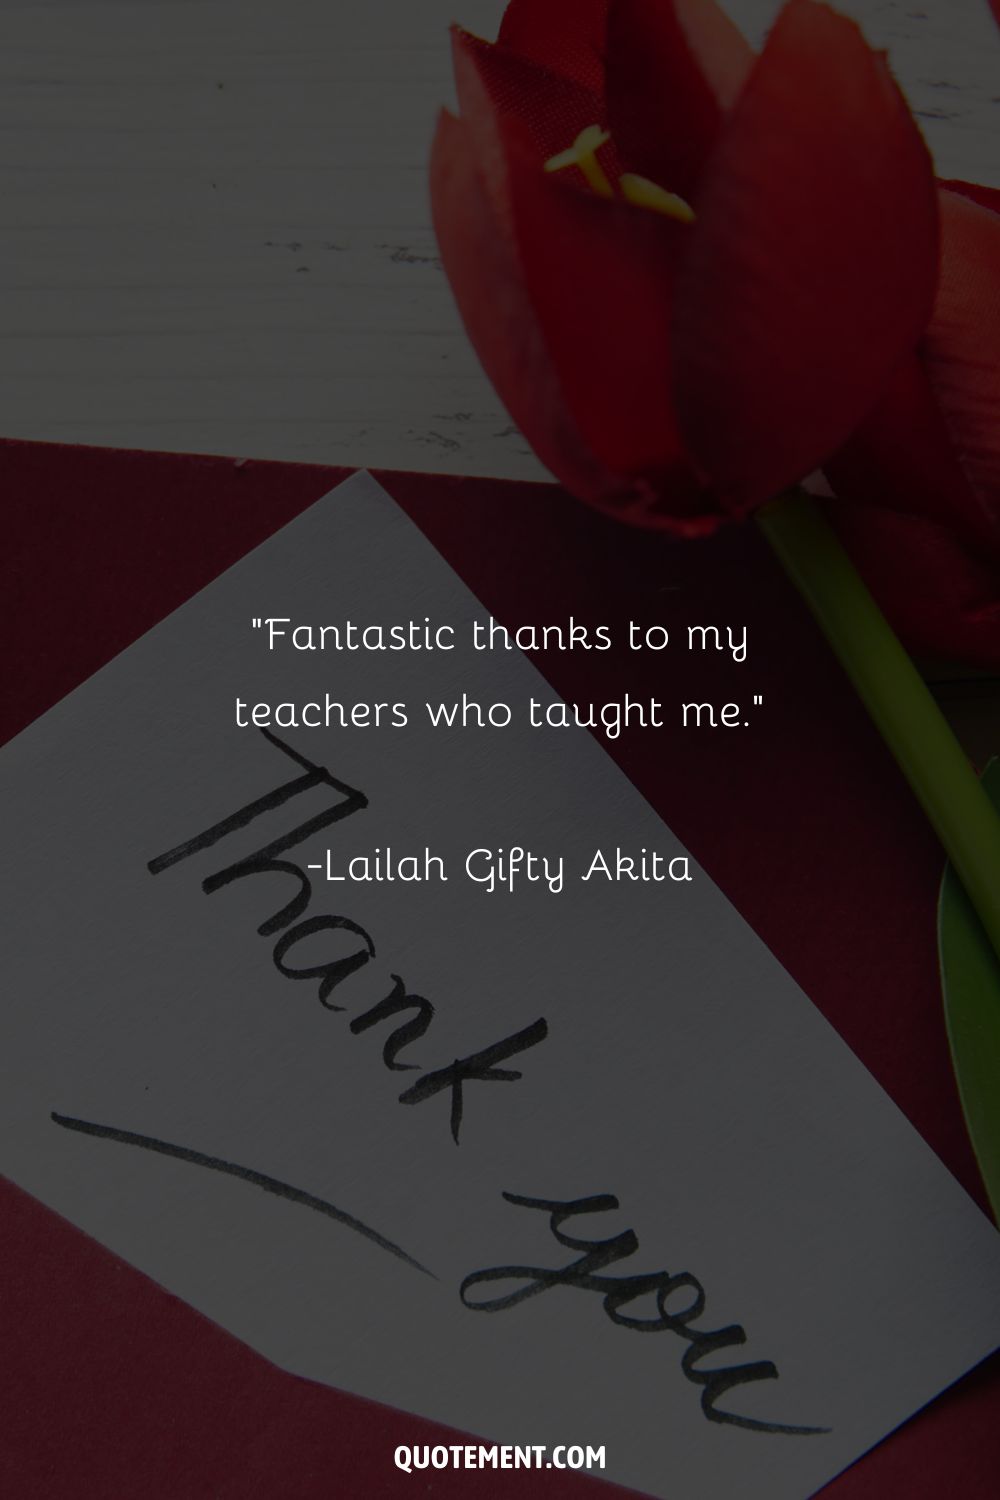 Fantastic thanks to my teachers who taught me.